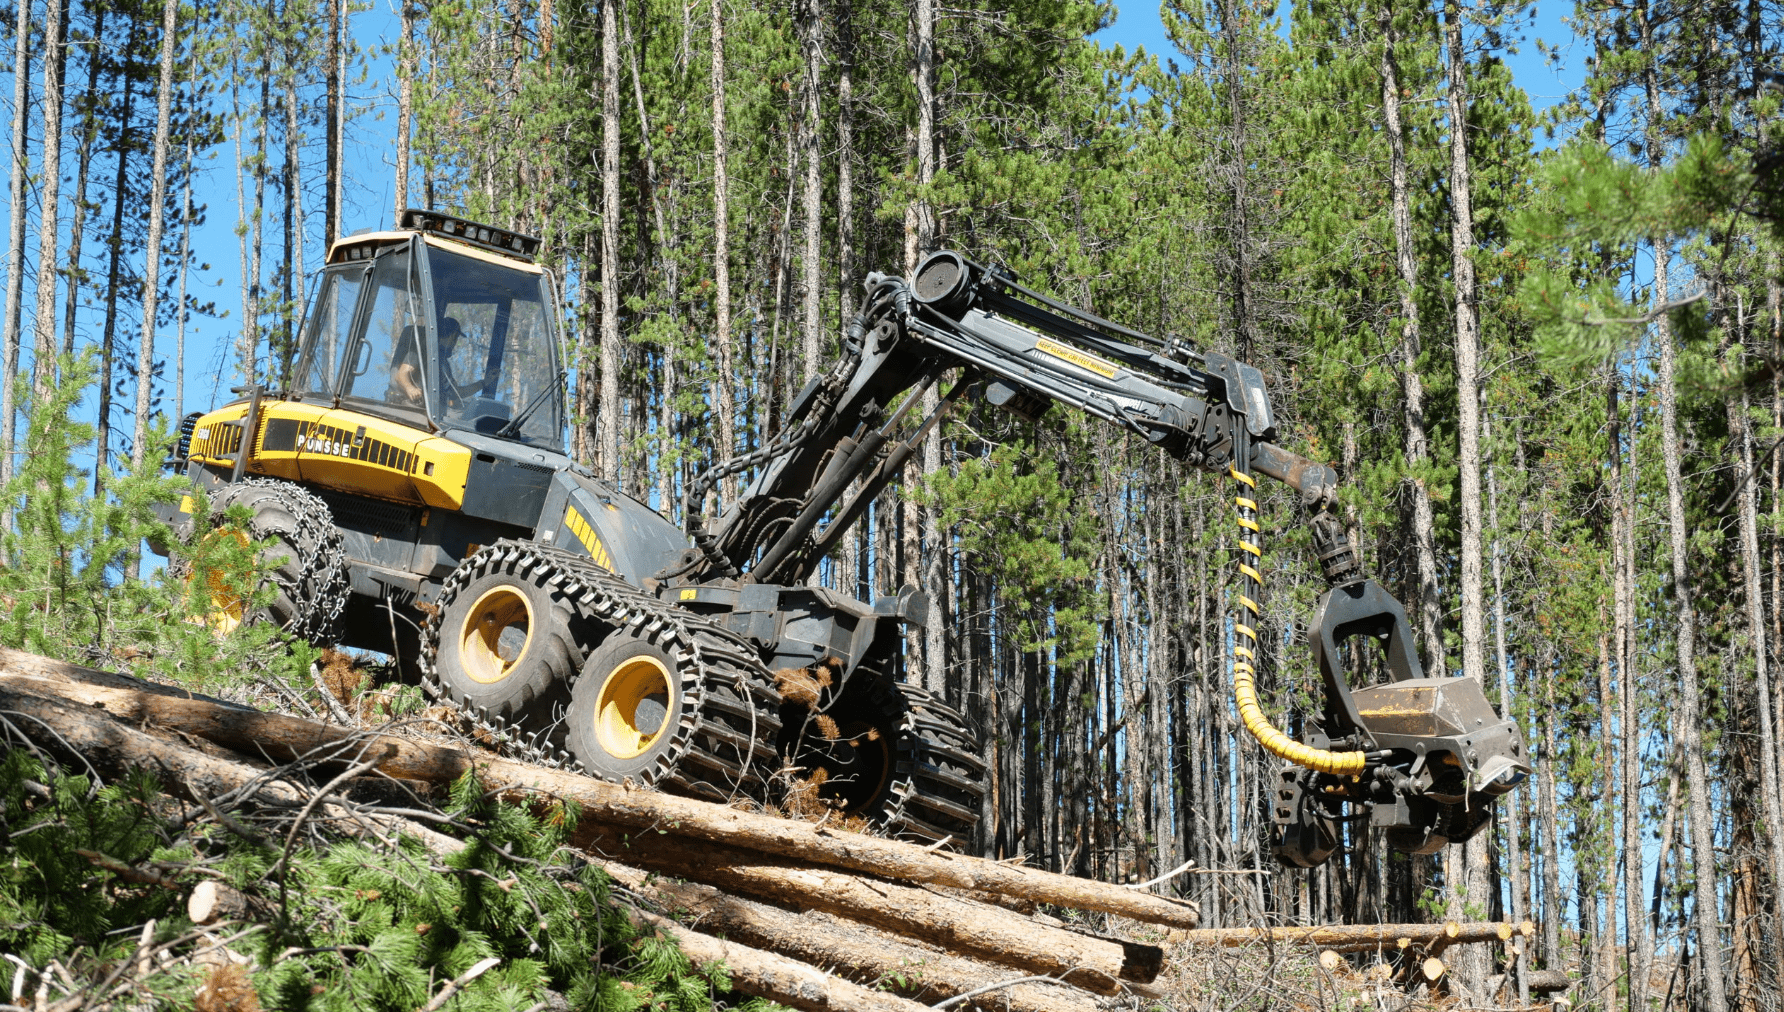 The <a style="color: #F2A41E;" href="https://www.denverwater.org/tap/building-better-forest?size=n_21_n" target="_blank">From Forests to Faucets program</a> improves forest health and protects watersheds. A partnership between Denver Water, the Rocky Mountain Region of the U.S. Forest Service, Colorado State Forest Service, and the Natural Resources Conservation Service, this program carries out forest management projects such as planting trees and thinning overly dense forests to reduce the risk of catastrophic wildfire with the goal of protecting watersheds and water supplies for communities across Colorado. As of July 2022, the program has treated 120,000 acres of forests in areas where Denver Water collects water and planted 1.4 million trees in areas affected by wildfires.